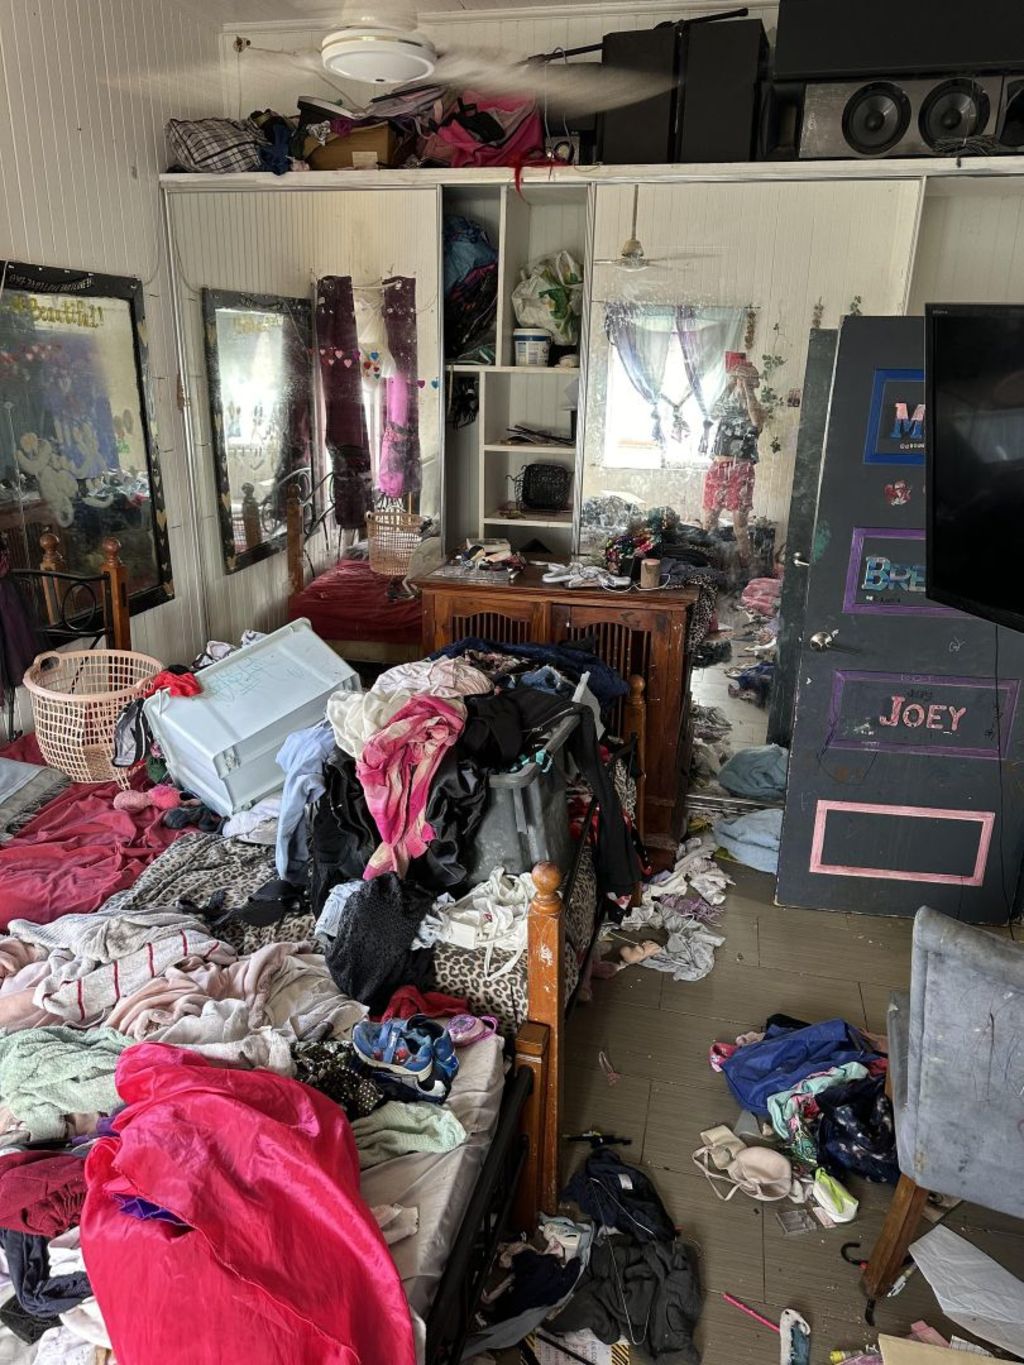 In an impassioned listing, the frustrated owner says the tenants were removed by police and the ocean-view property needs $30,000 spent on it. Photo: Rent Better Team